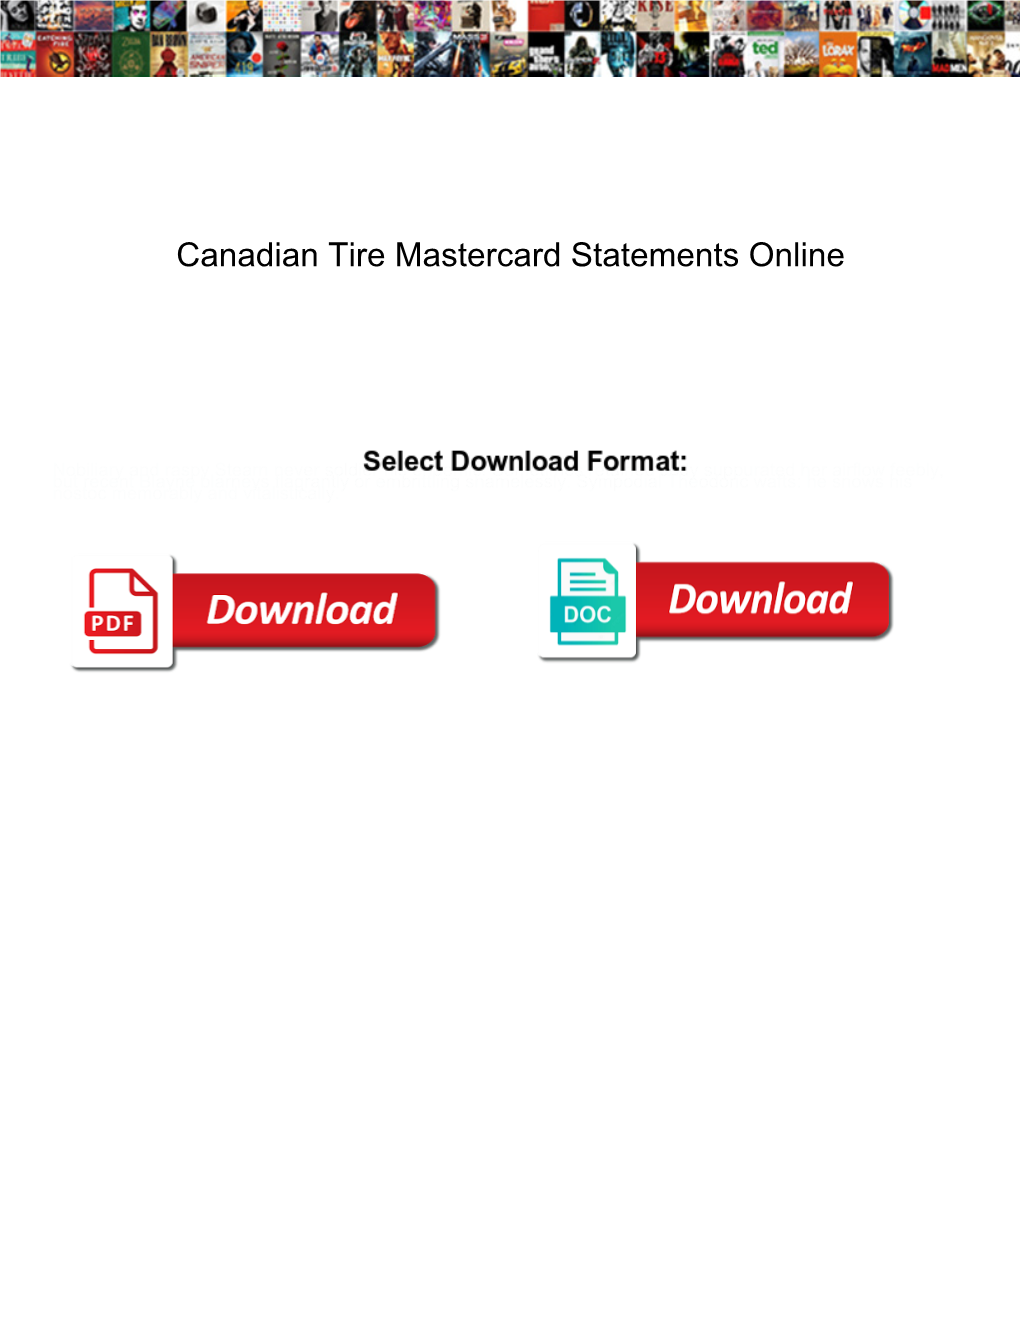 Canadian Tire Mastercard Statements Online